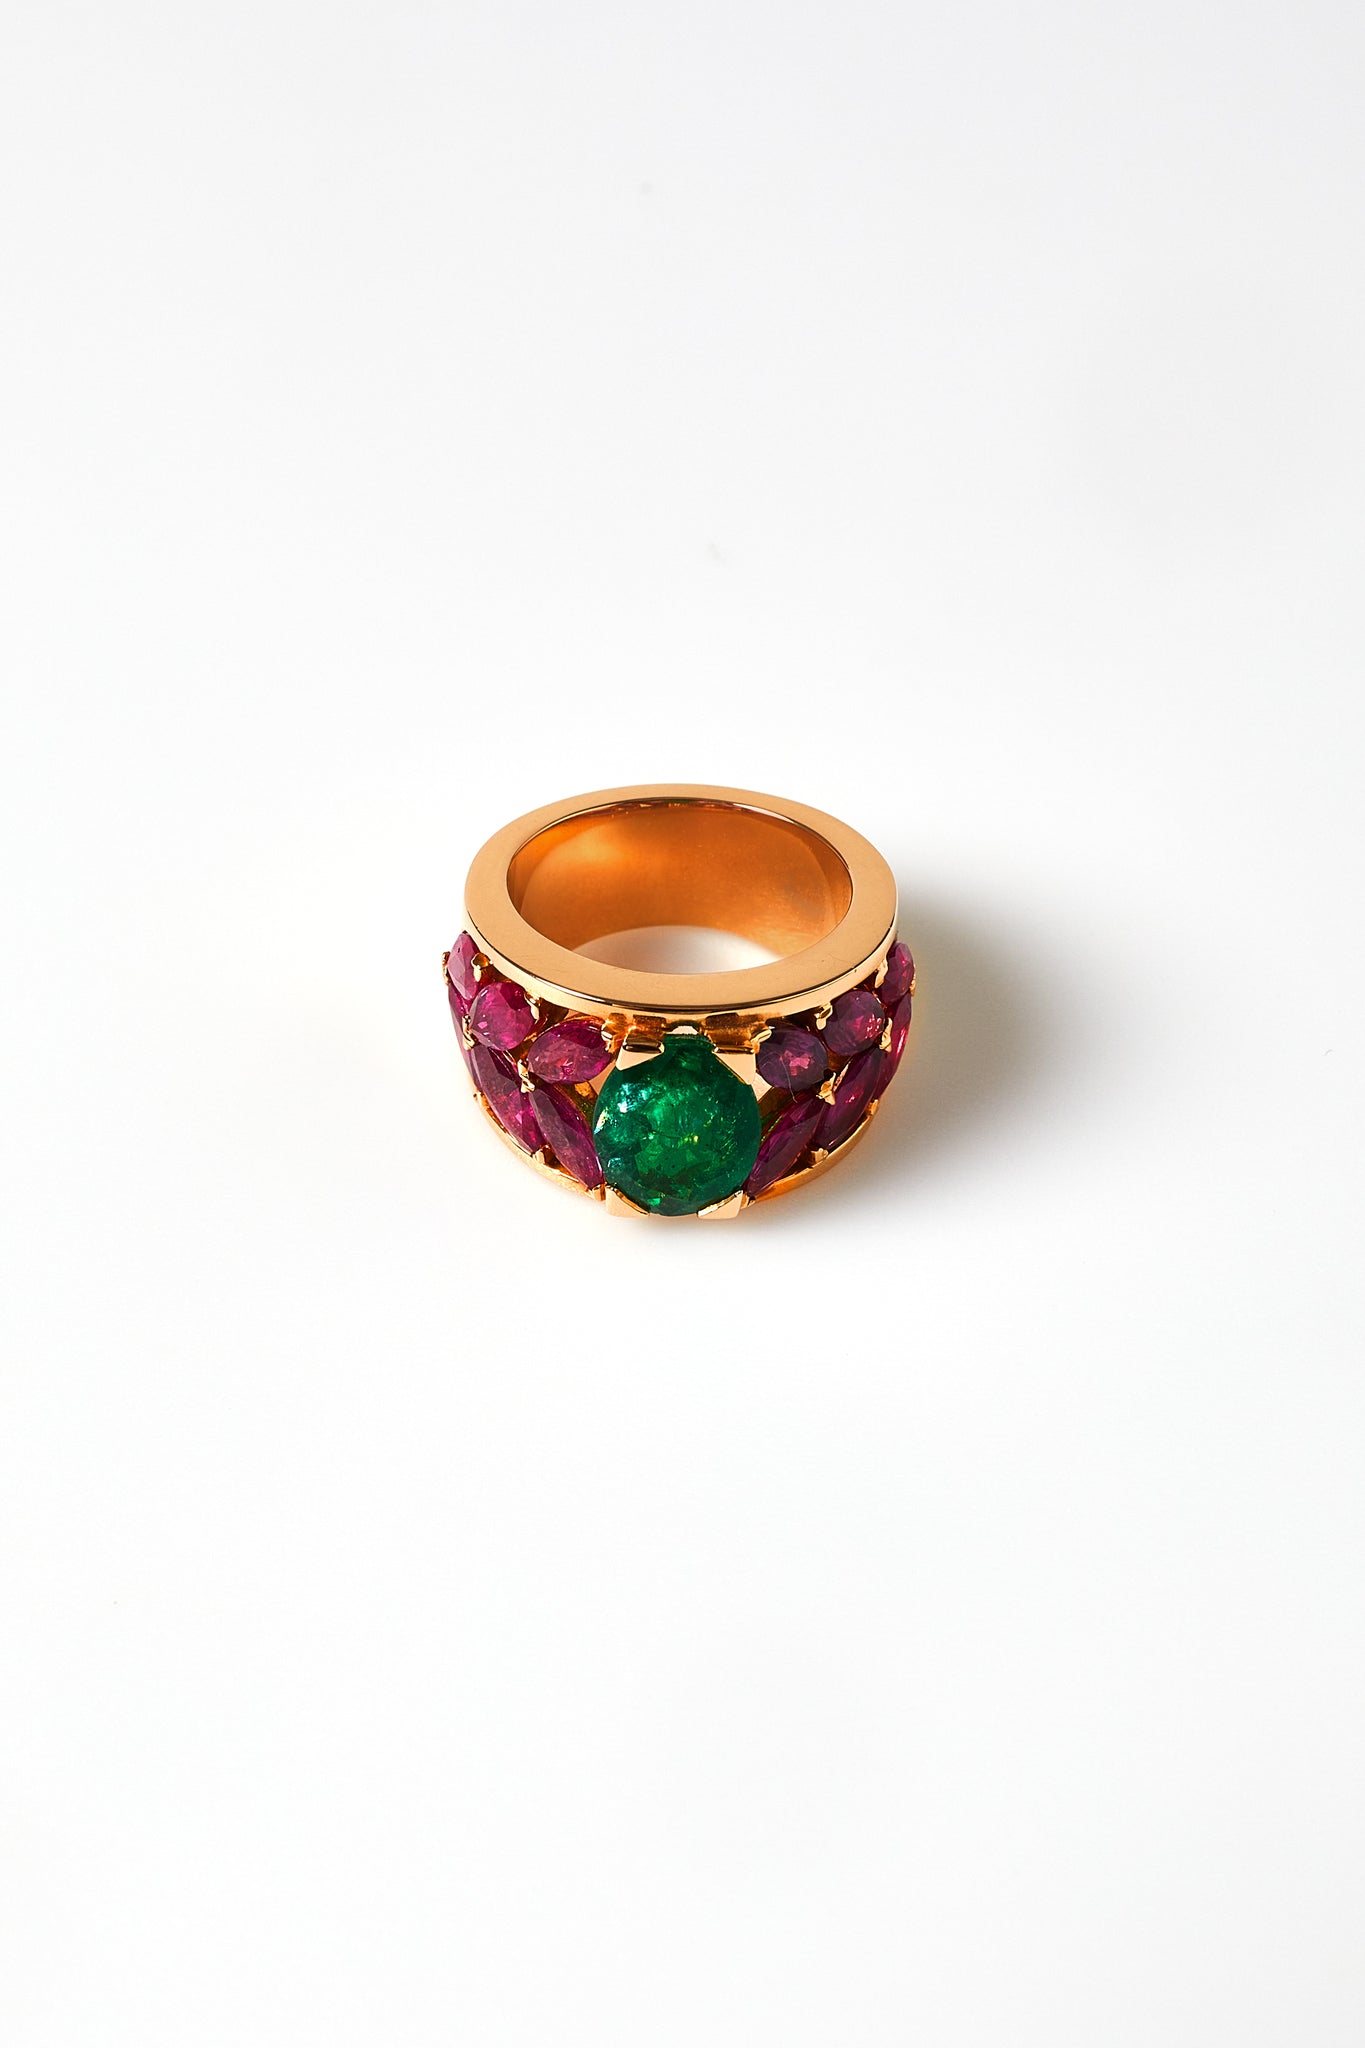 Surround Emerald and Ruby ring